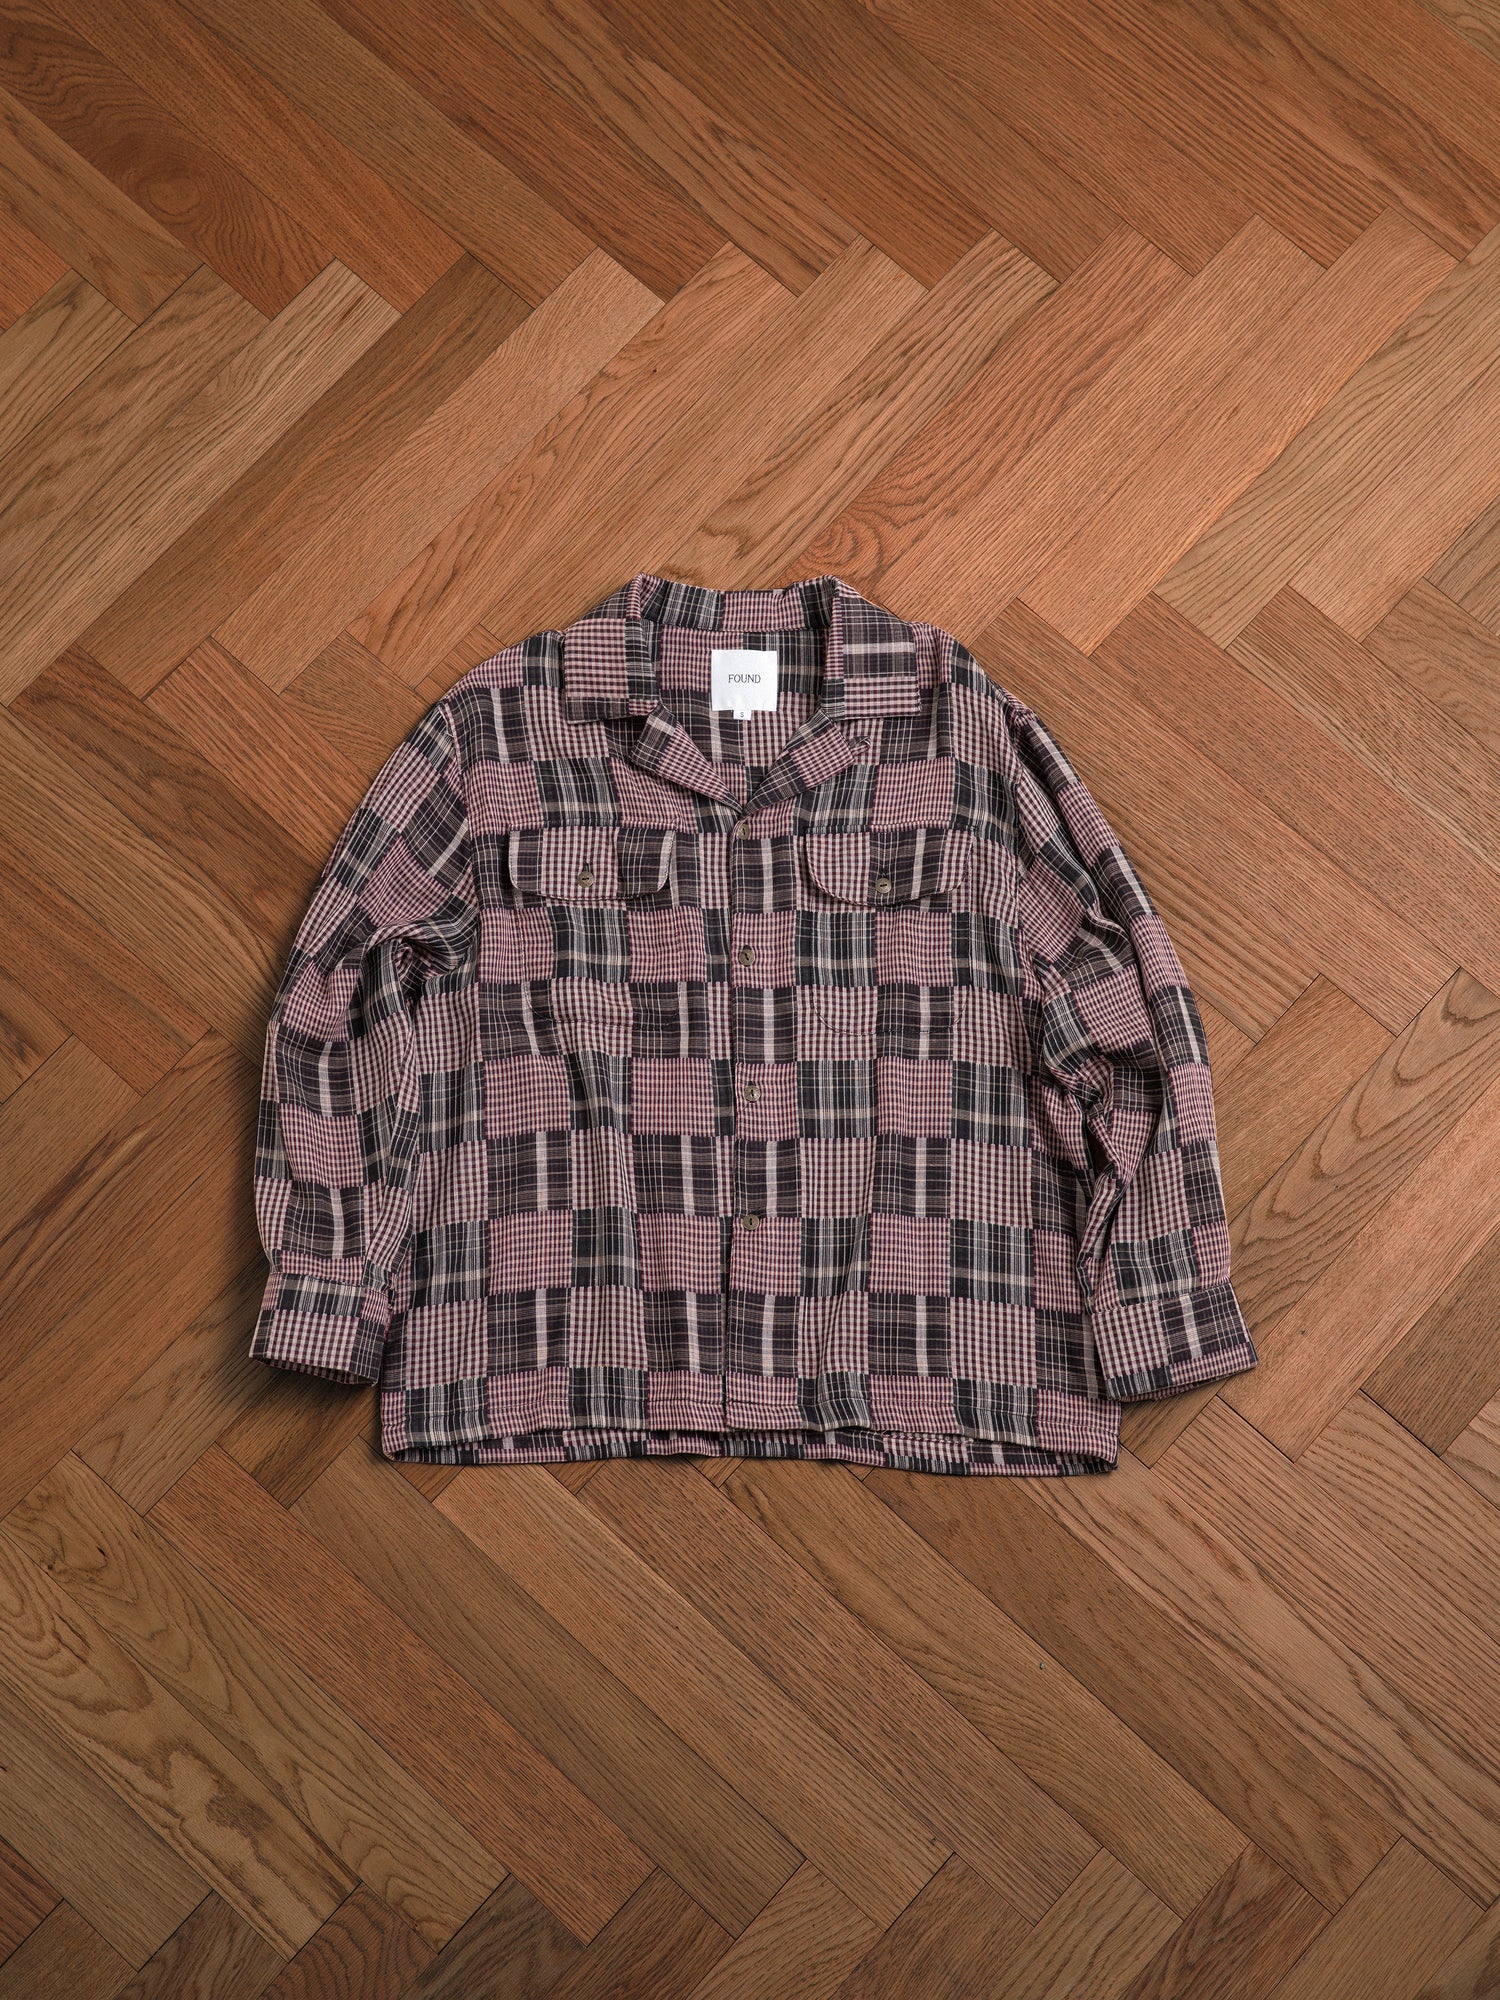 A timeless silhouette Multi-Flannel LS Camp Shirt by Found on a wooden floor.